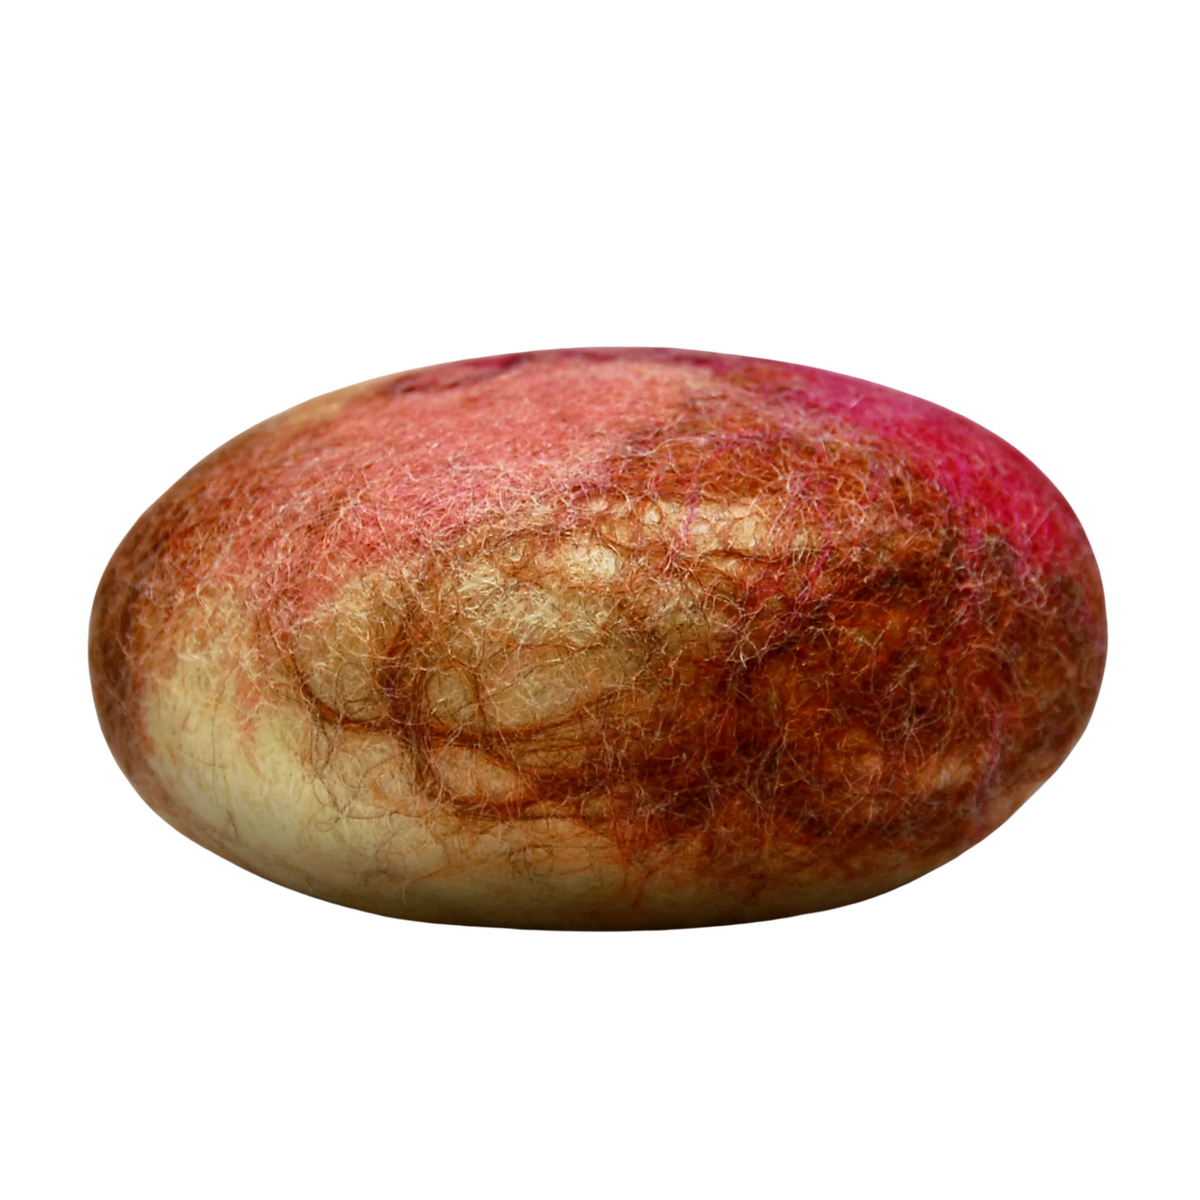 Close-up image of a single fresh mango with a textured skin showing reddish and yellowish hues, ideal for Fiat Luxe - Cinnamon Oat Felted Soap, isolated on a white background.